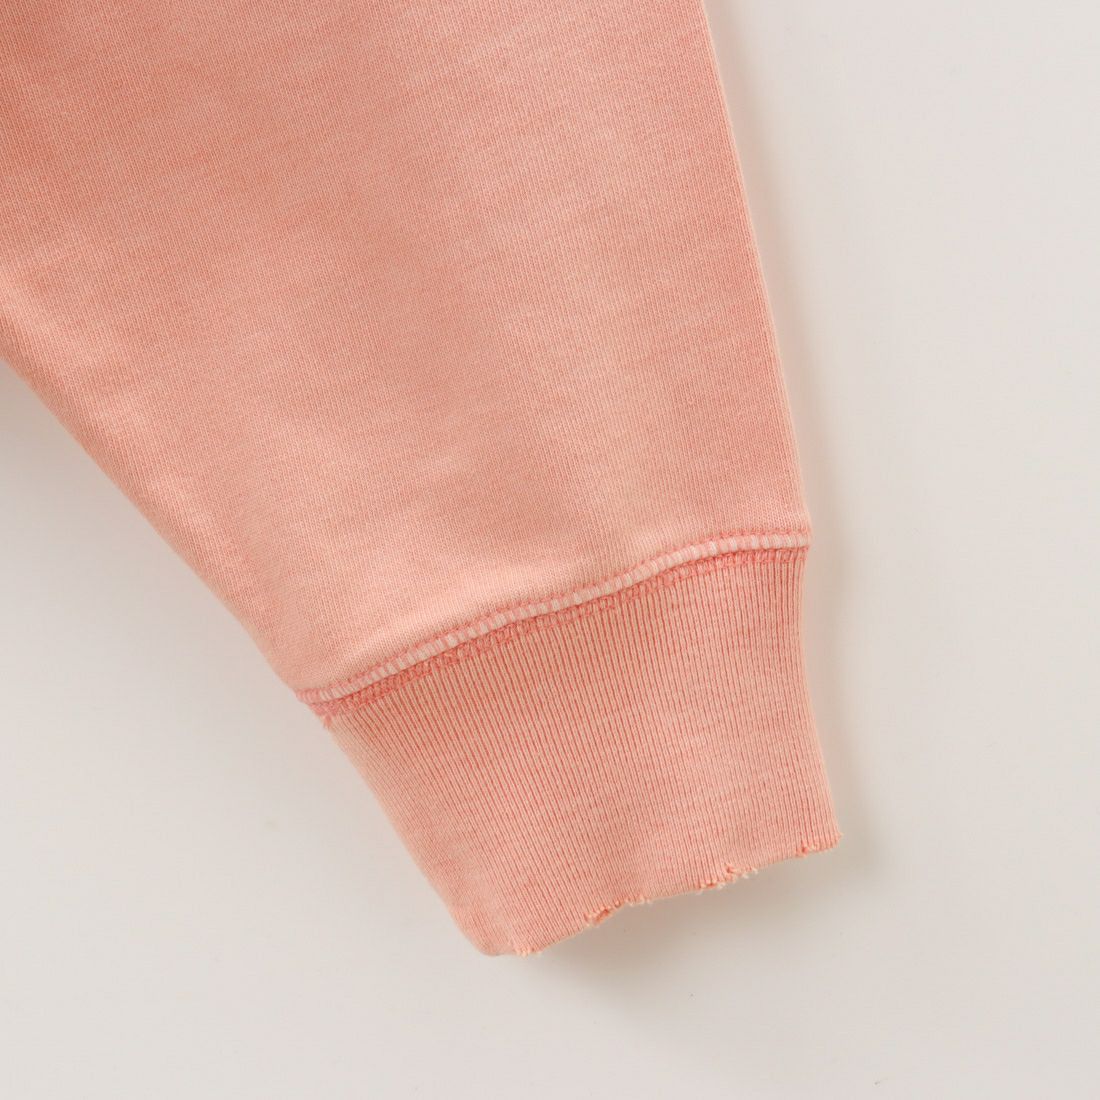 Jeans Factory Clothes [ジーンズファクトリークローズ] ピグメントダメージTシャツ [2321-216IN] PINK